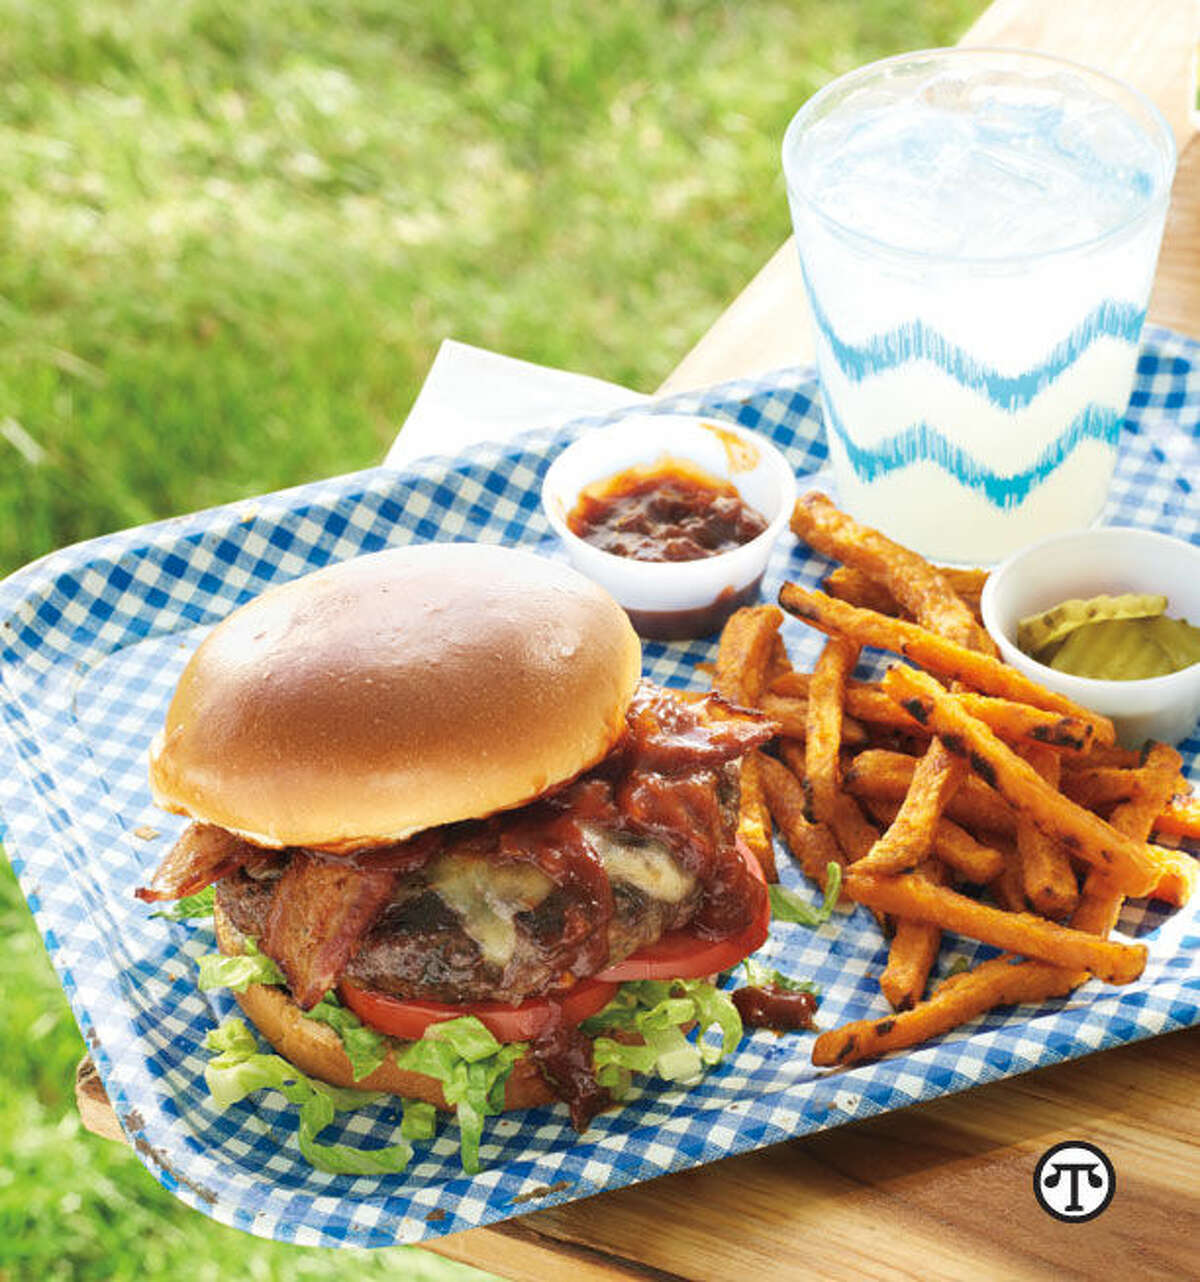 Bacon Cheeseburgers with Kentucky Bourbon Sauce can bring a delicious blend of BBQ styles to your next cookout. (NAPS)